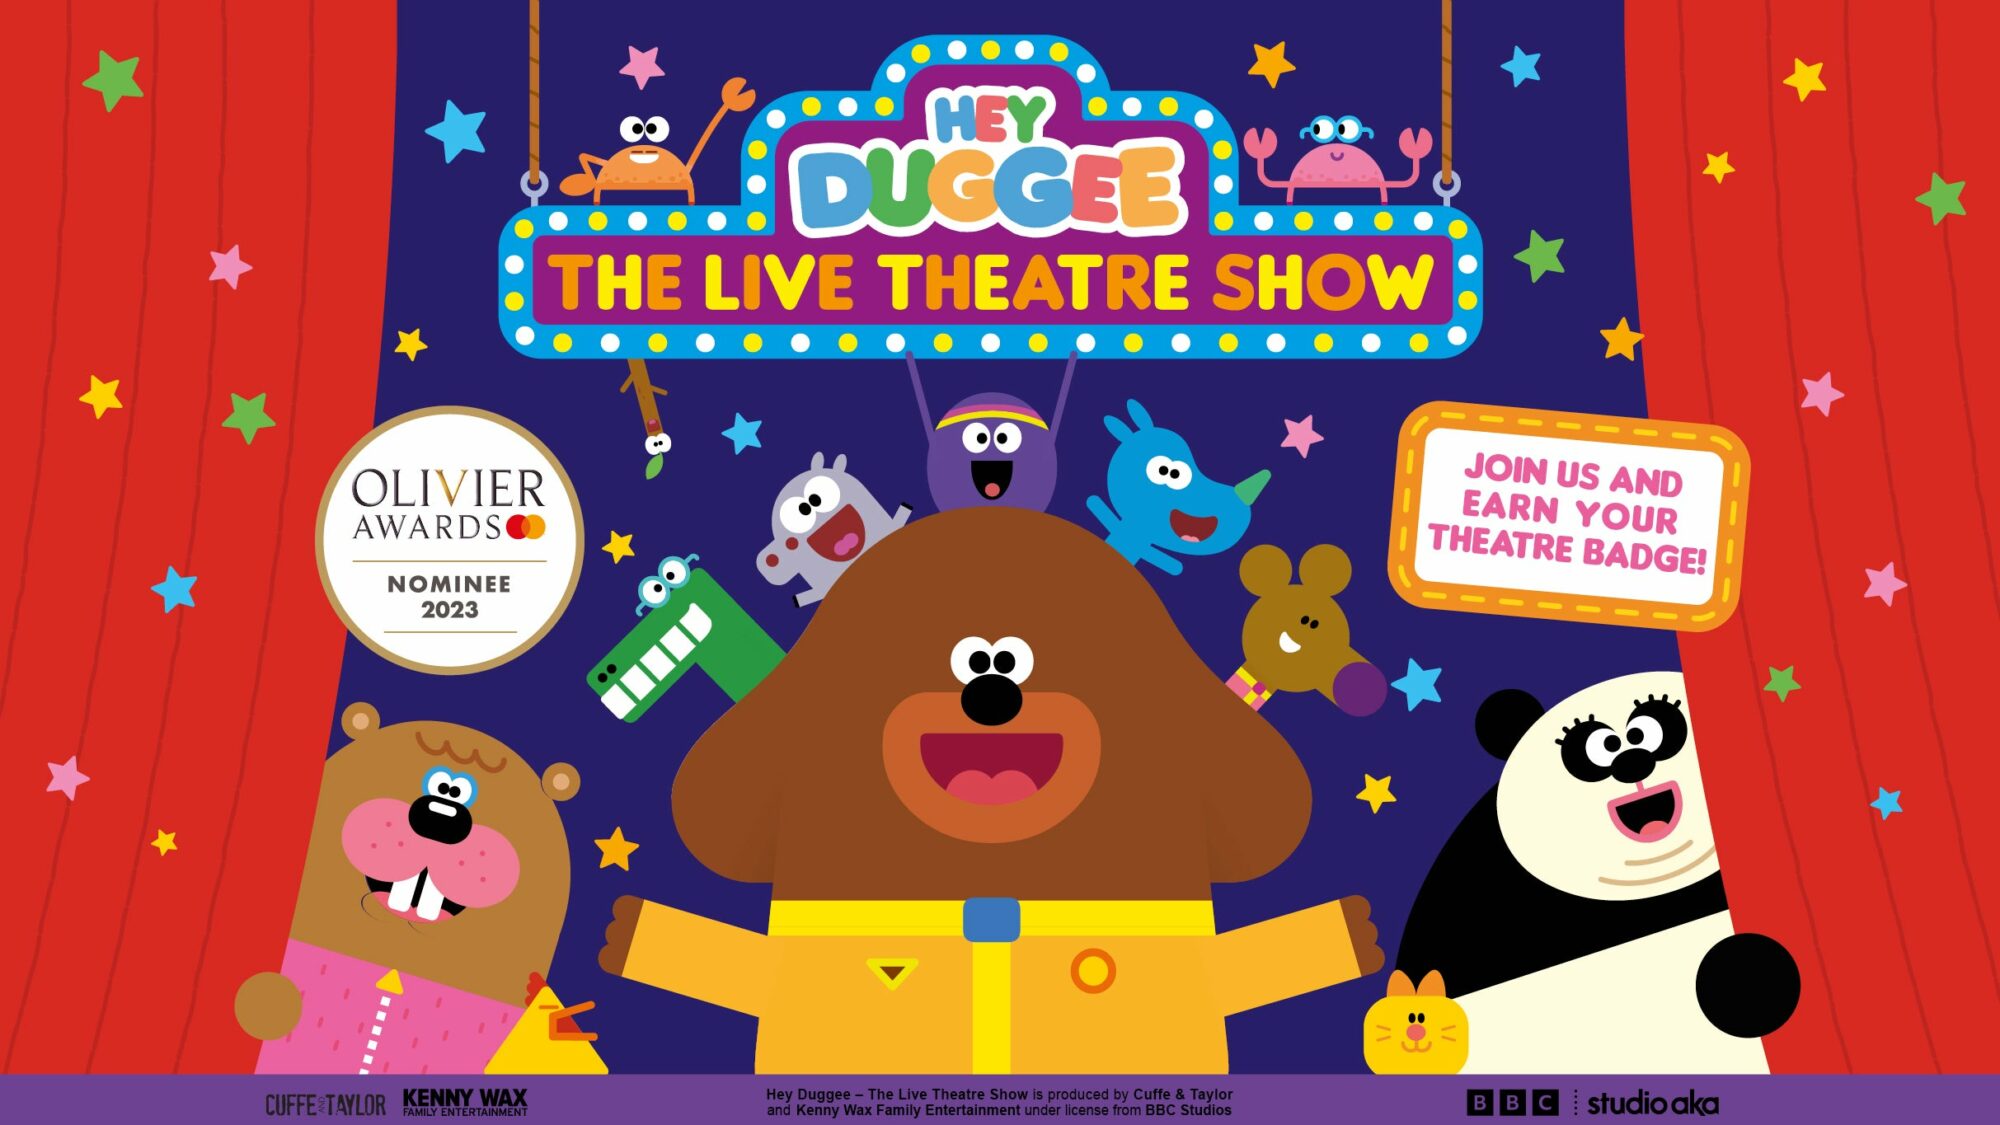 Image name HEY DUGGEE The Live Theatre Show at Leeds Grand Theatre Leeds the 18 image from the post HEY DUGGEE - The Live Theatre Show at Leeds Grand Theatre, Leeds in Yorkshire.com.